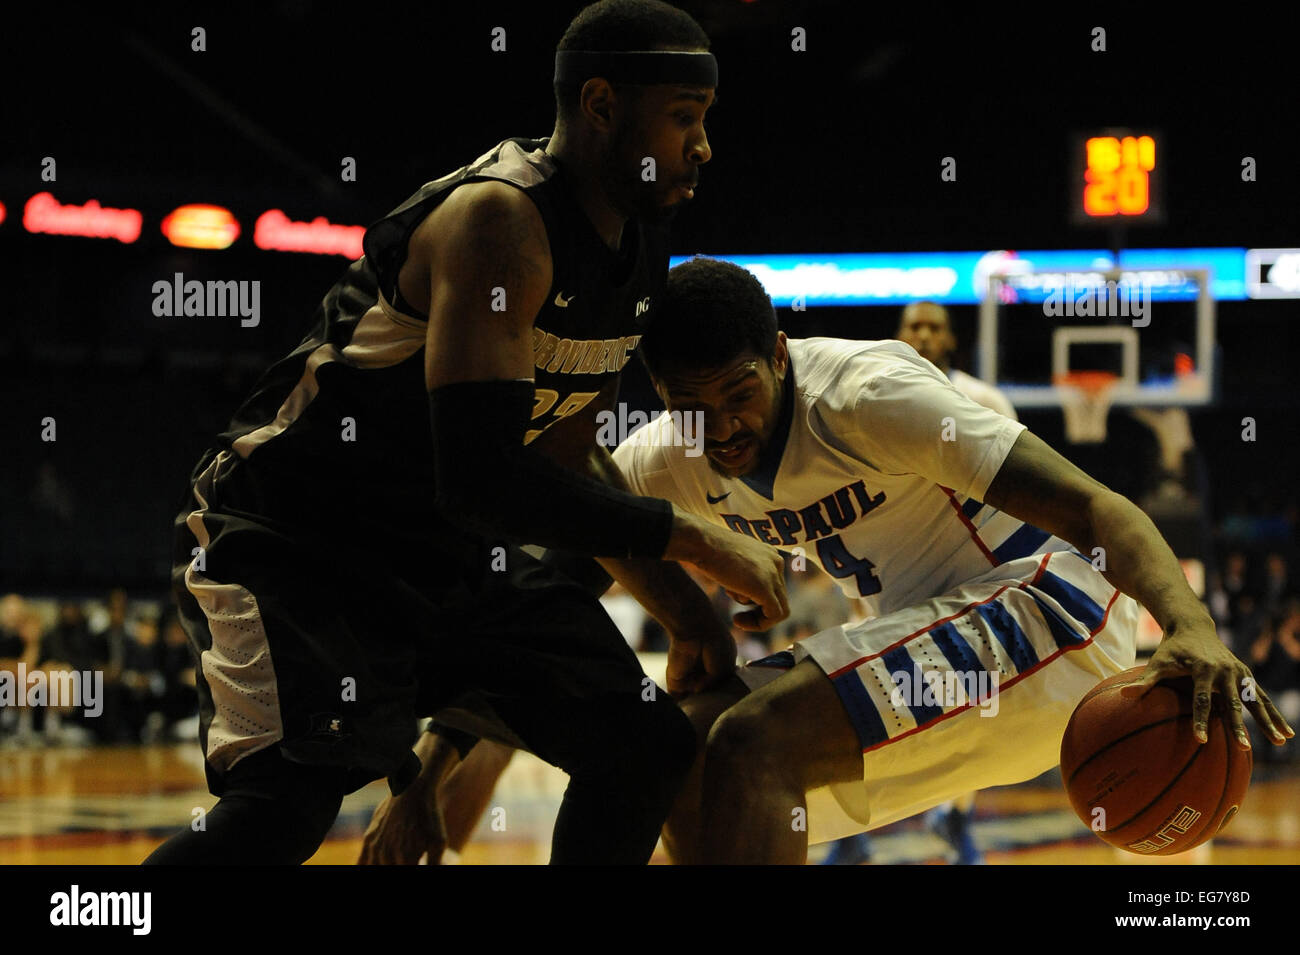 Rosemont, Illionois, USA. 18th February, 2015. Providence Friars forward LaDontae Henton (23) defends against DePaul Blue Demons forward Myke Henry (4) during the NCAA men's basketball game between the Providence Friars and the DePaul Blue Demons at the Allstate Arena in Rosemont, IL. Providence won 80-53 over DePaul. Credit:  Cal Sport Media/Alamy Live News Stock Photo